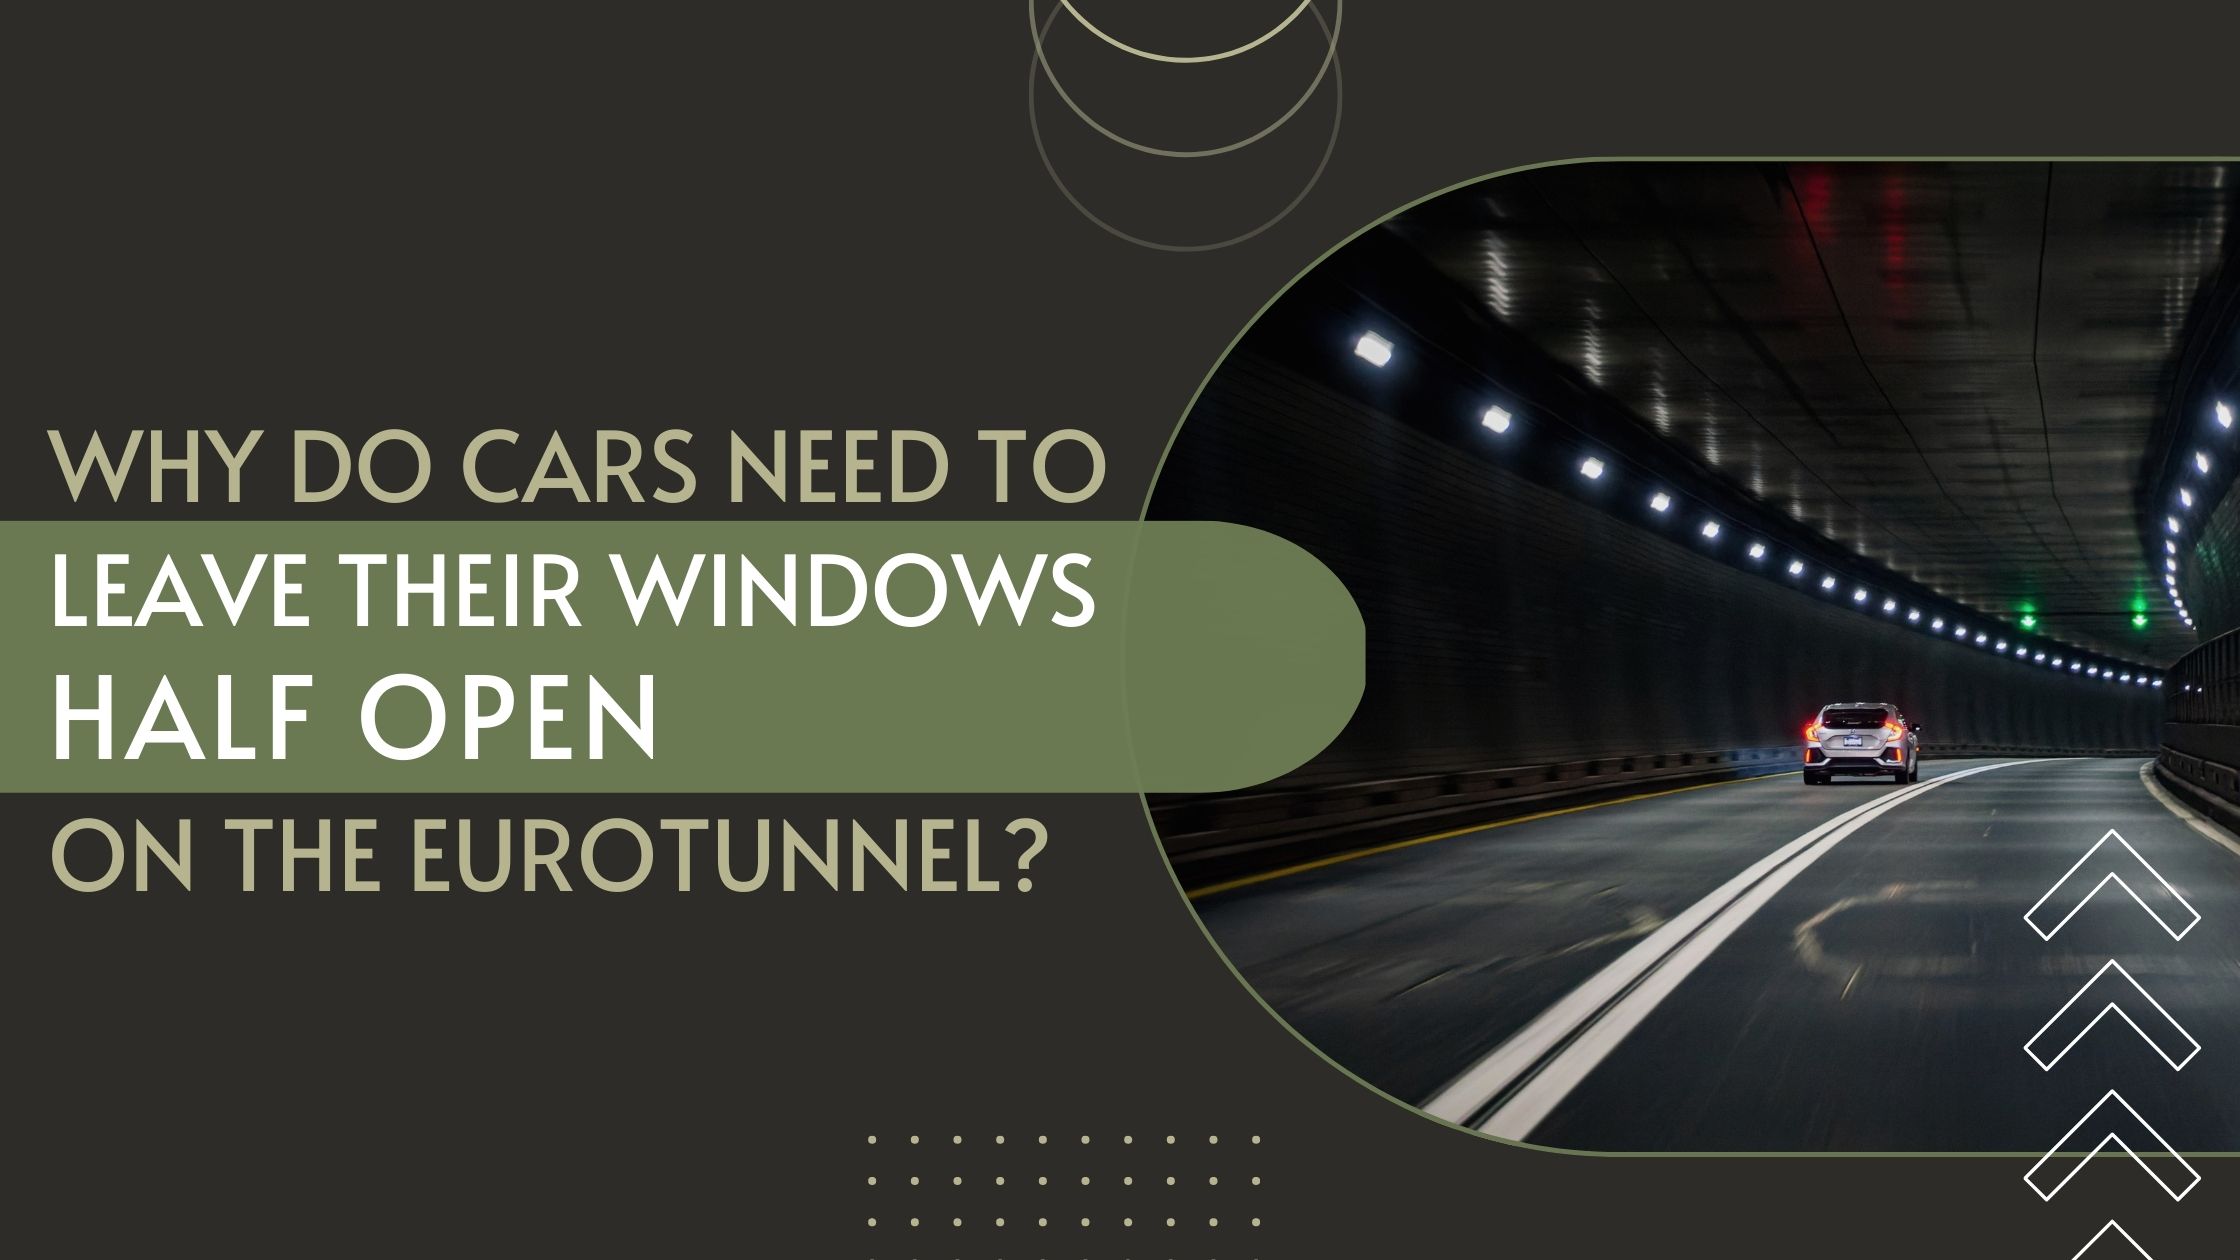 Why Do Cars Need To Leave Their Windows Half Open On The Eurotunnel?